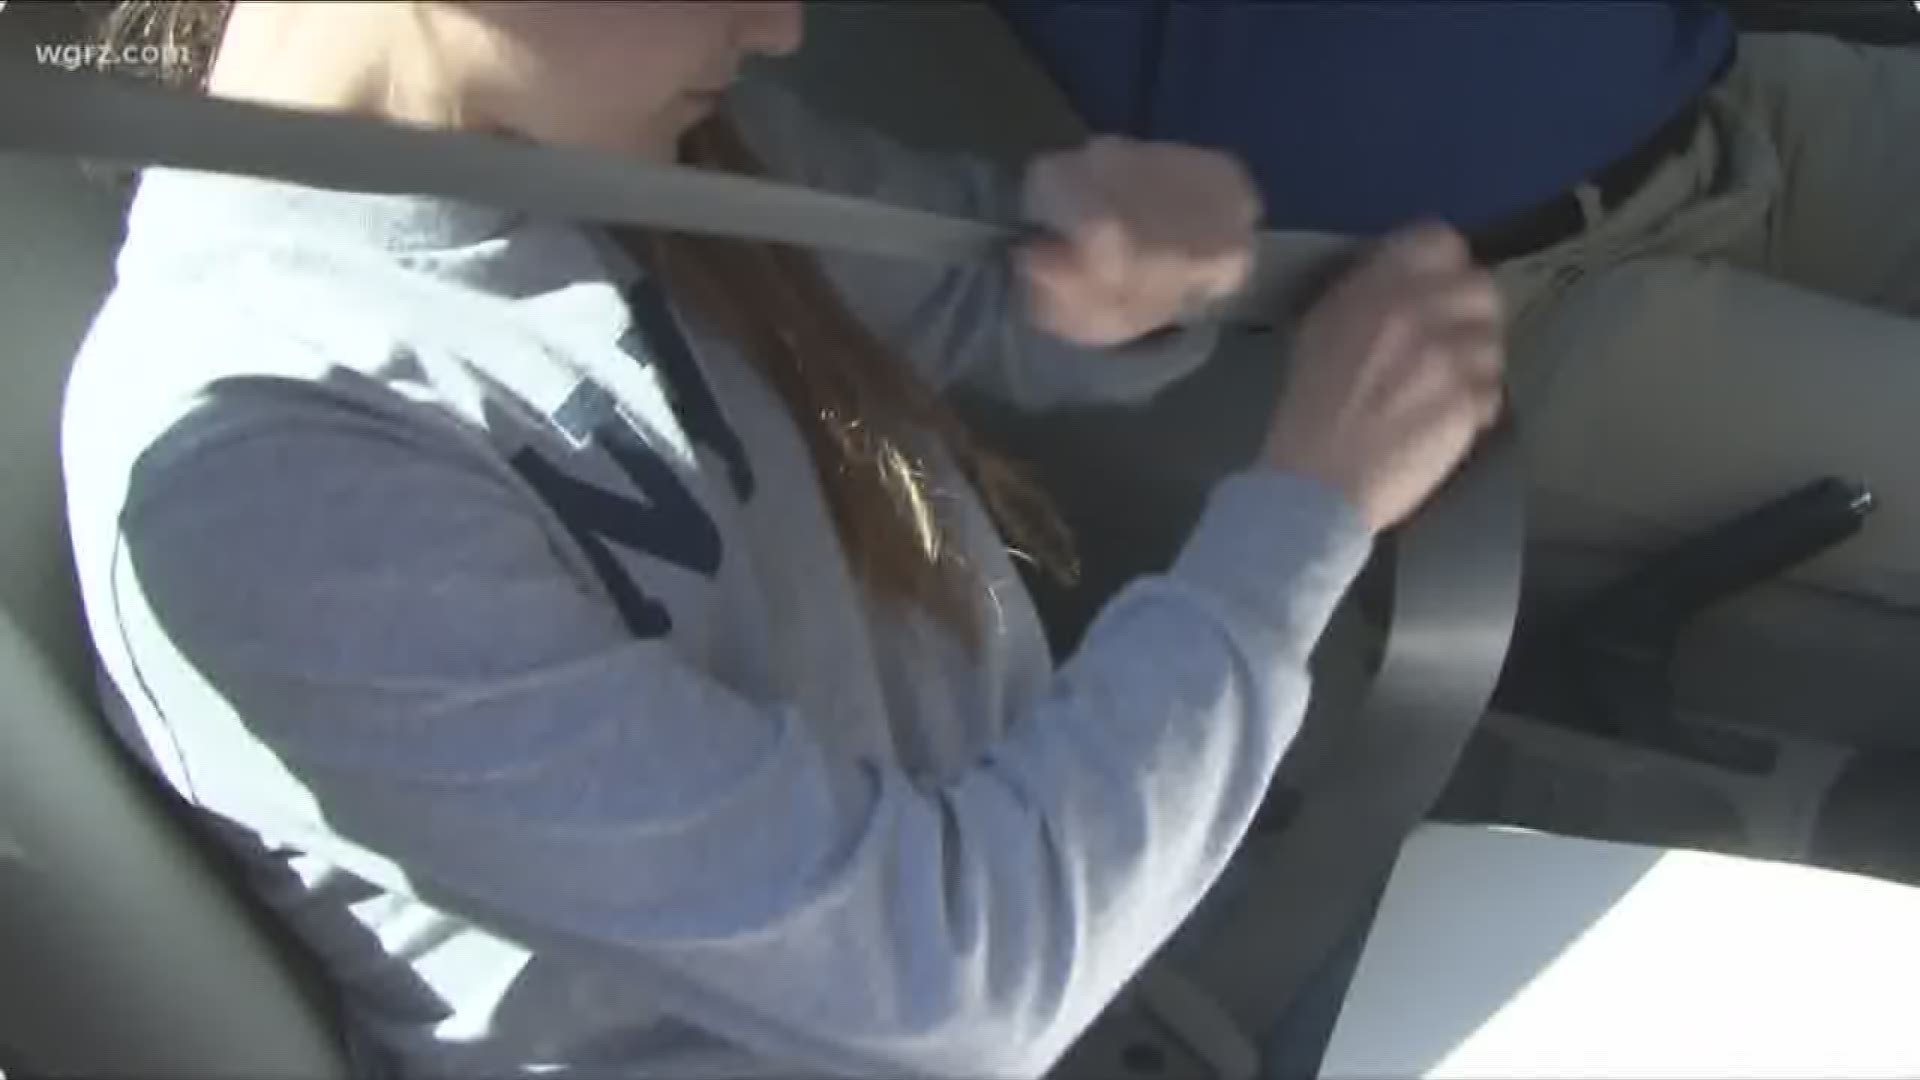 28 States already have some kind of law on the books mandating back-seat seat-belt usage